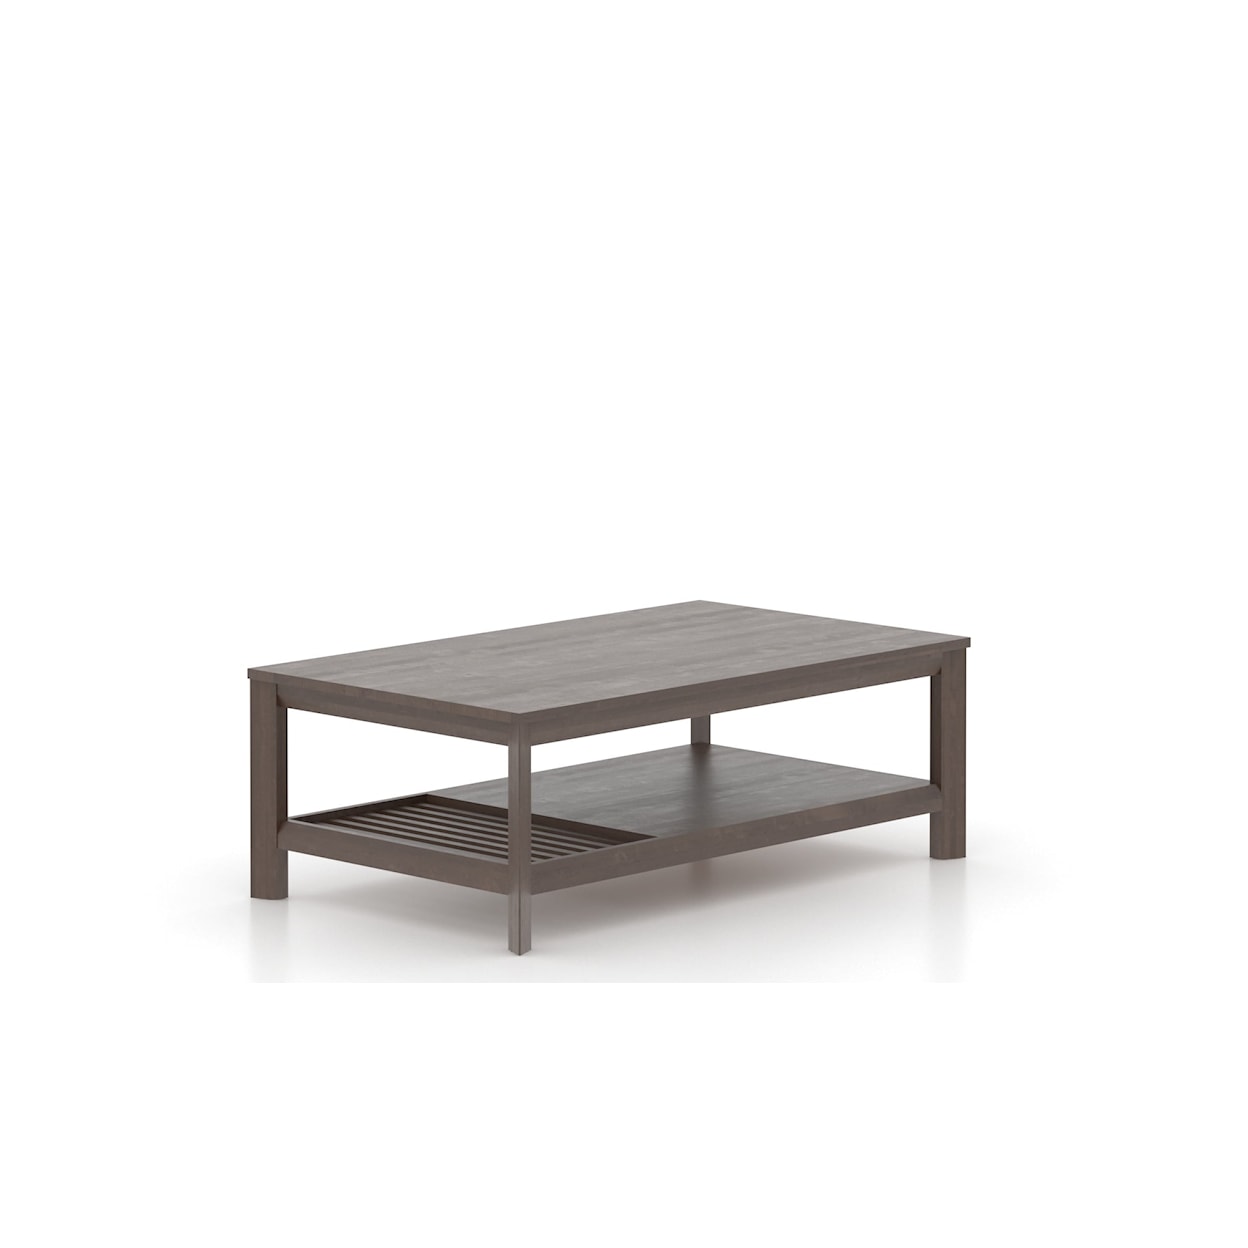 Canadel Accent Fusion Rectangular Coffee Table